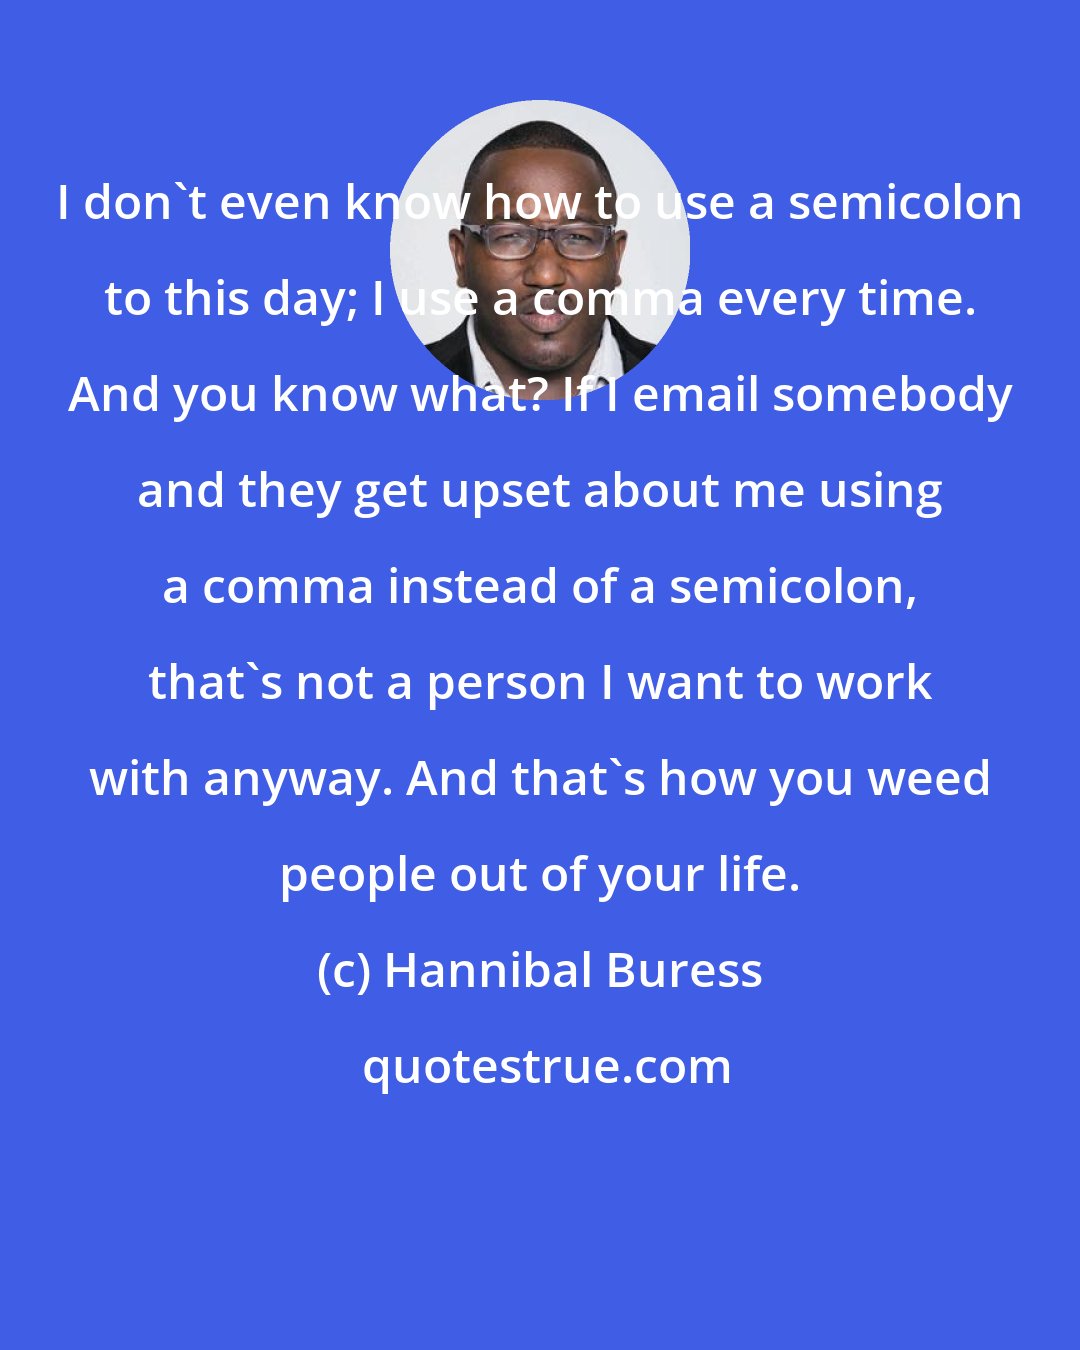 Hannibal Buress: I don't even know how to use a semicolon to this day; I use a comma every time. And you know what? If I email somebody and they get upset about me using a comma instead of a semicolon, that's not a person I want to work with anyway. And that's how you weed people out of your life.